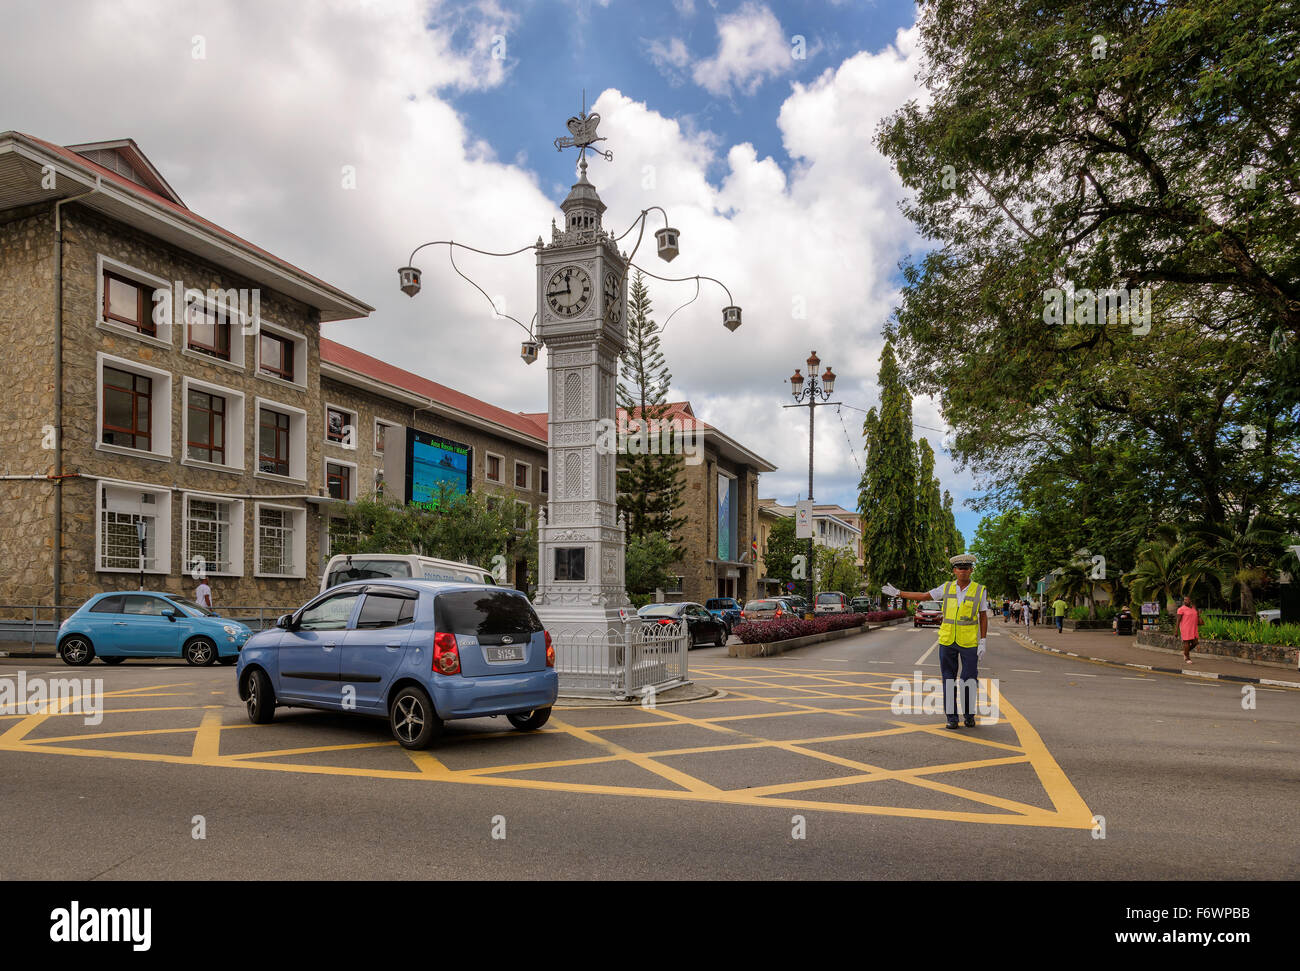 The clock tower of Victoria, traffic in the downtown, Seychelles Stock Photo